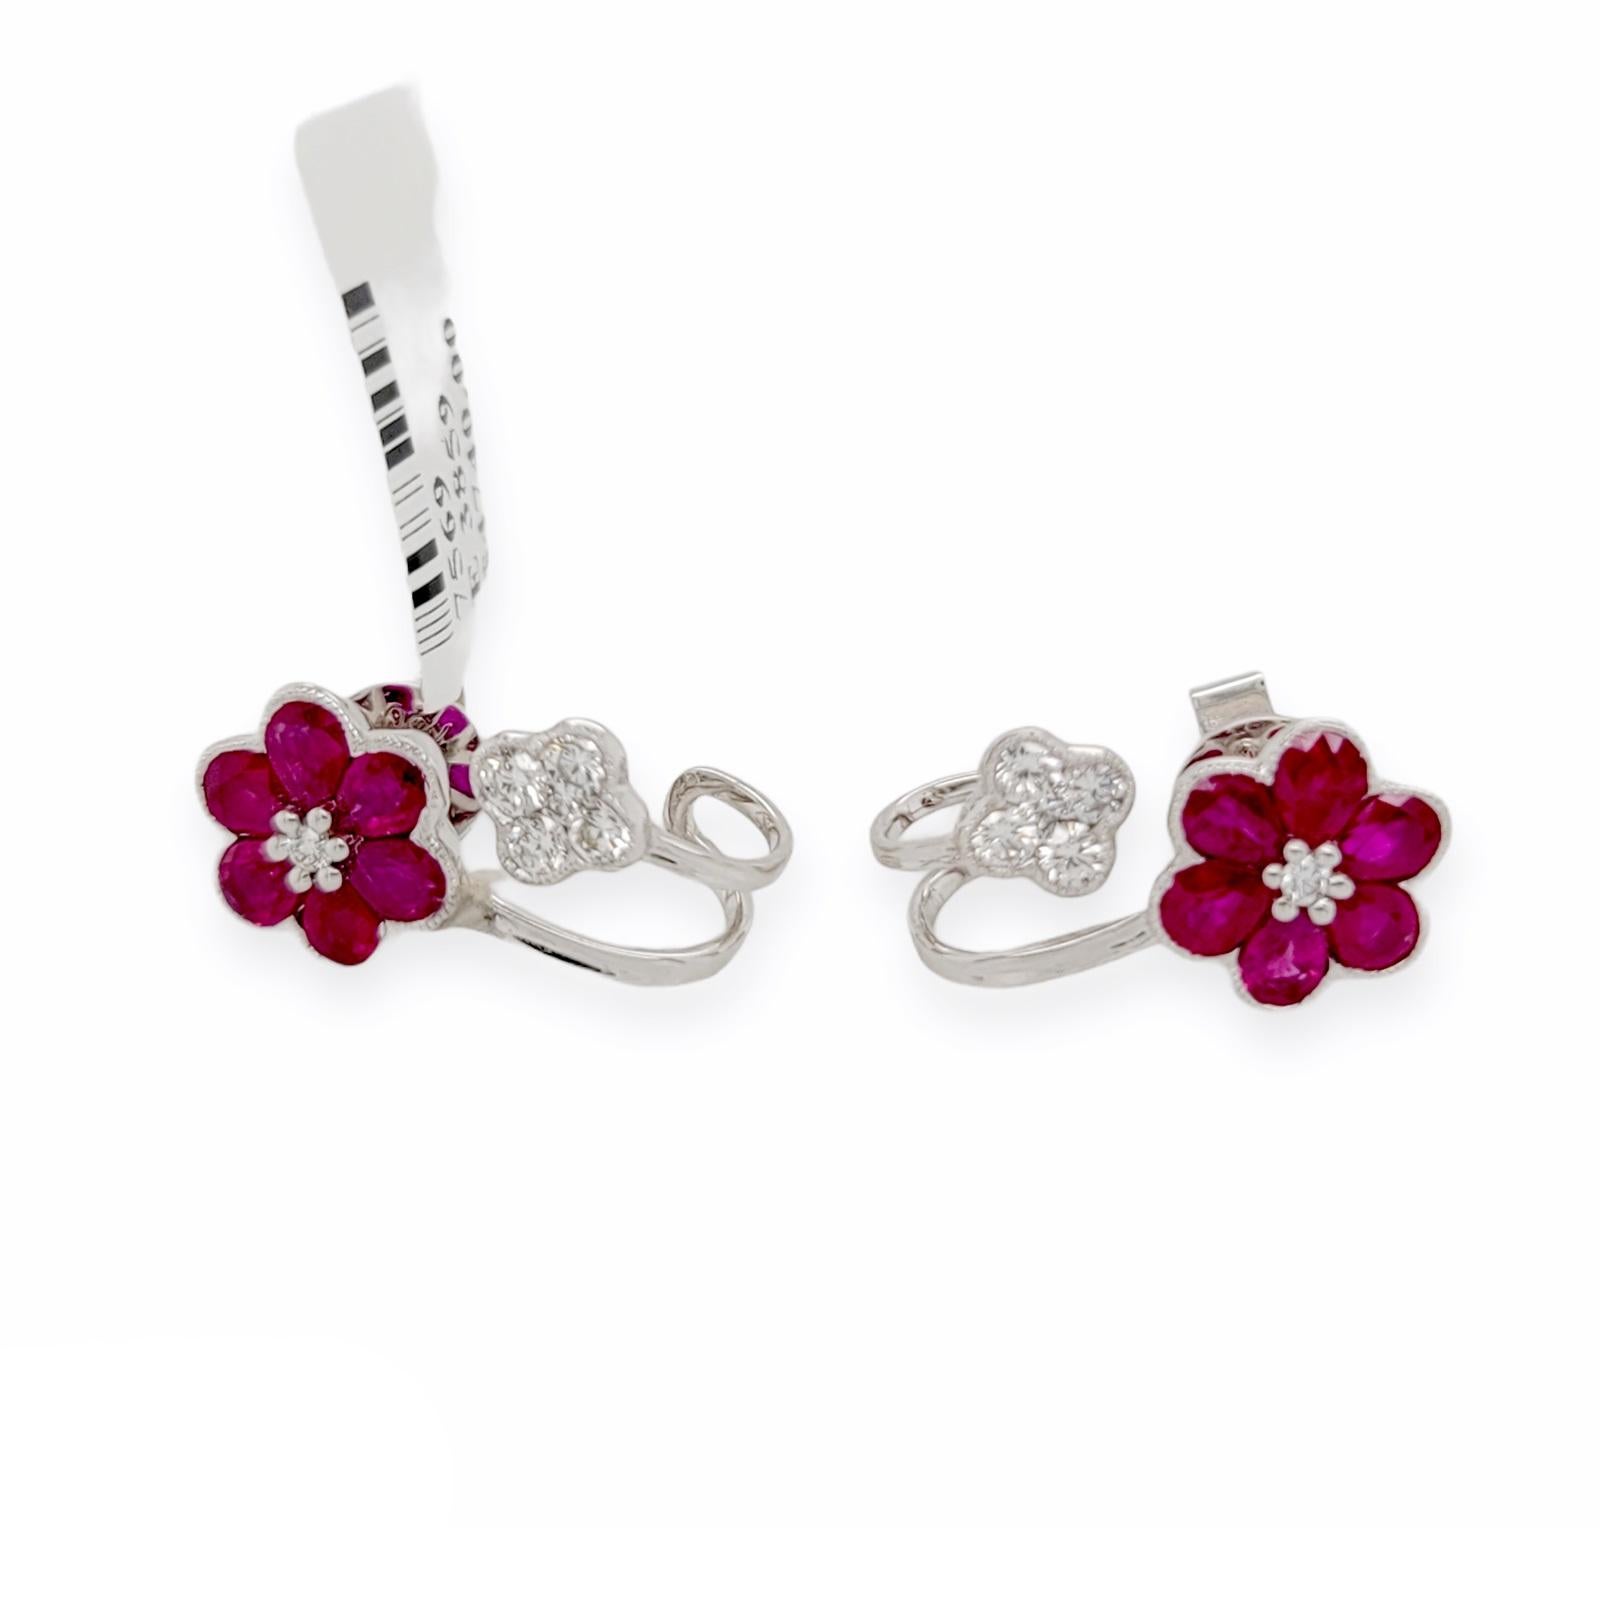 Round Cut 1.60 CT Natural Ruby & 0.45 CT Diamonds in 18K White Gold Flower Earrings For Sale